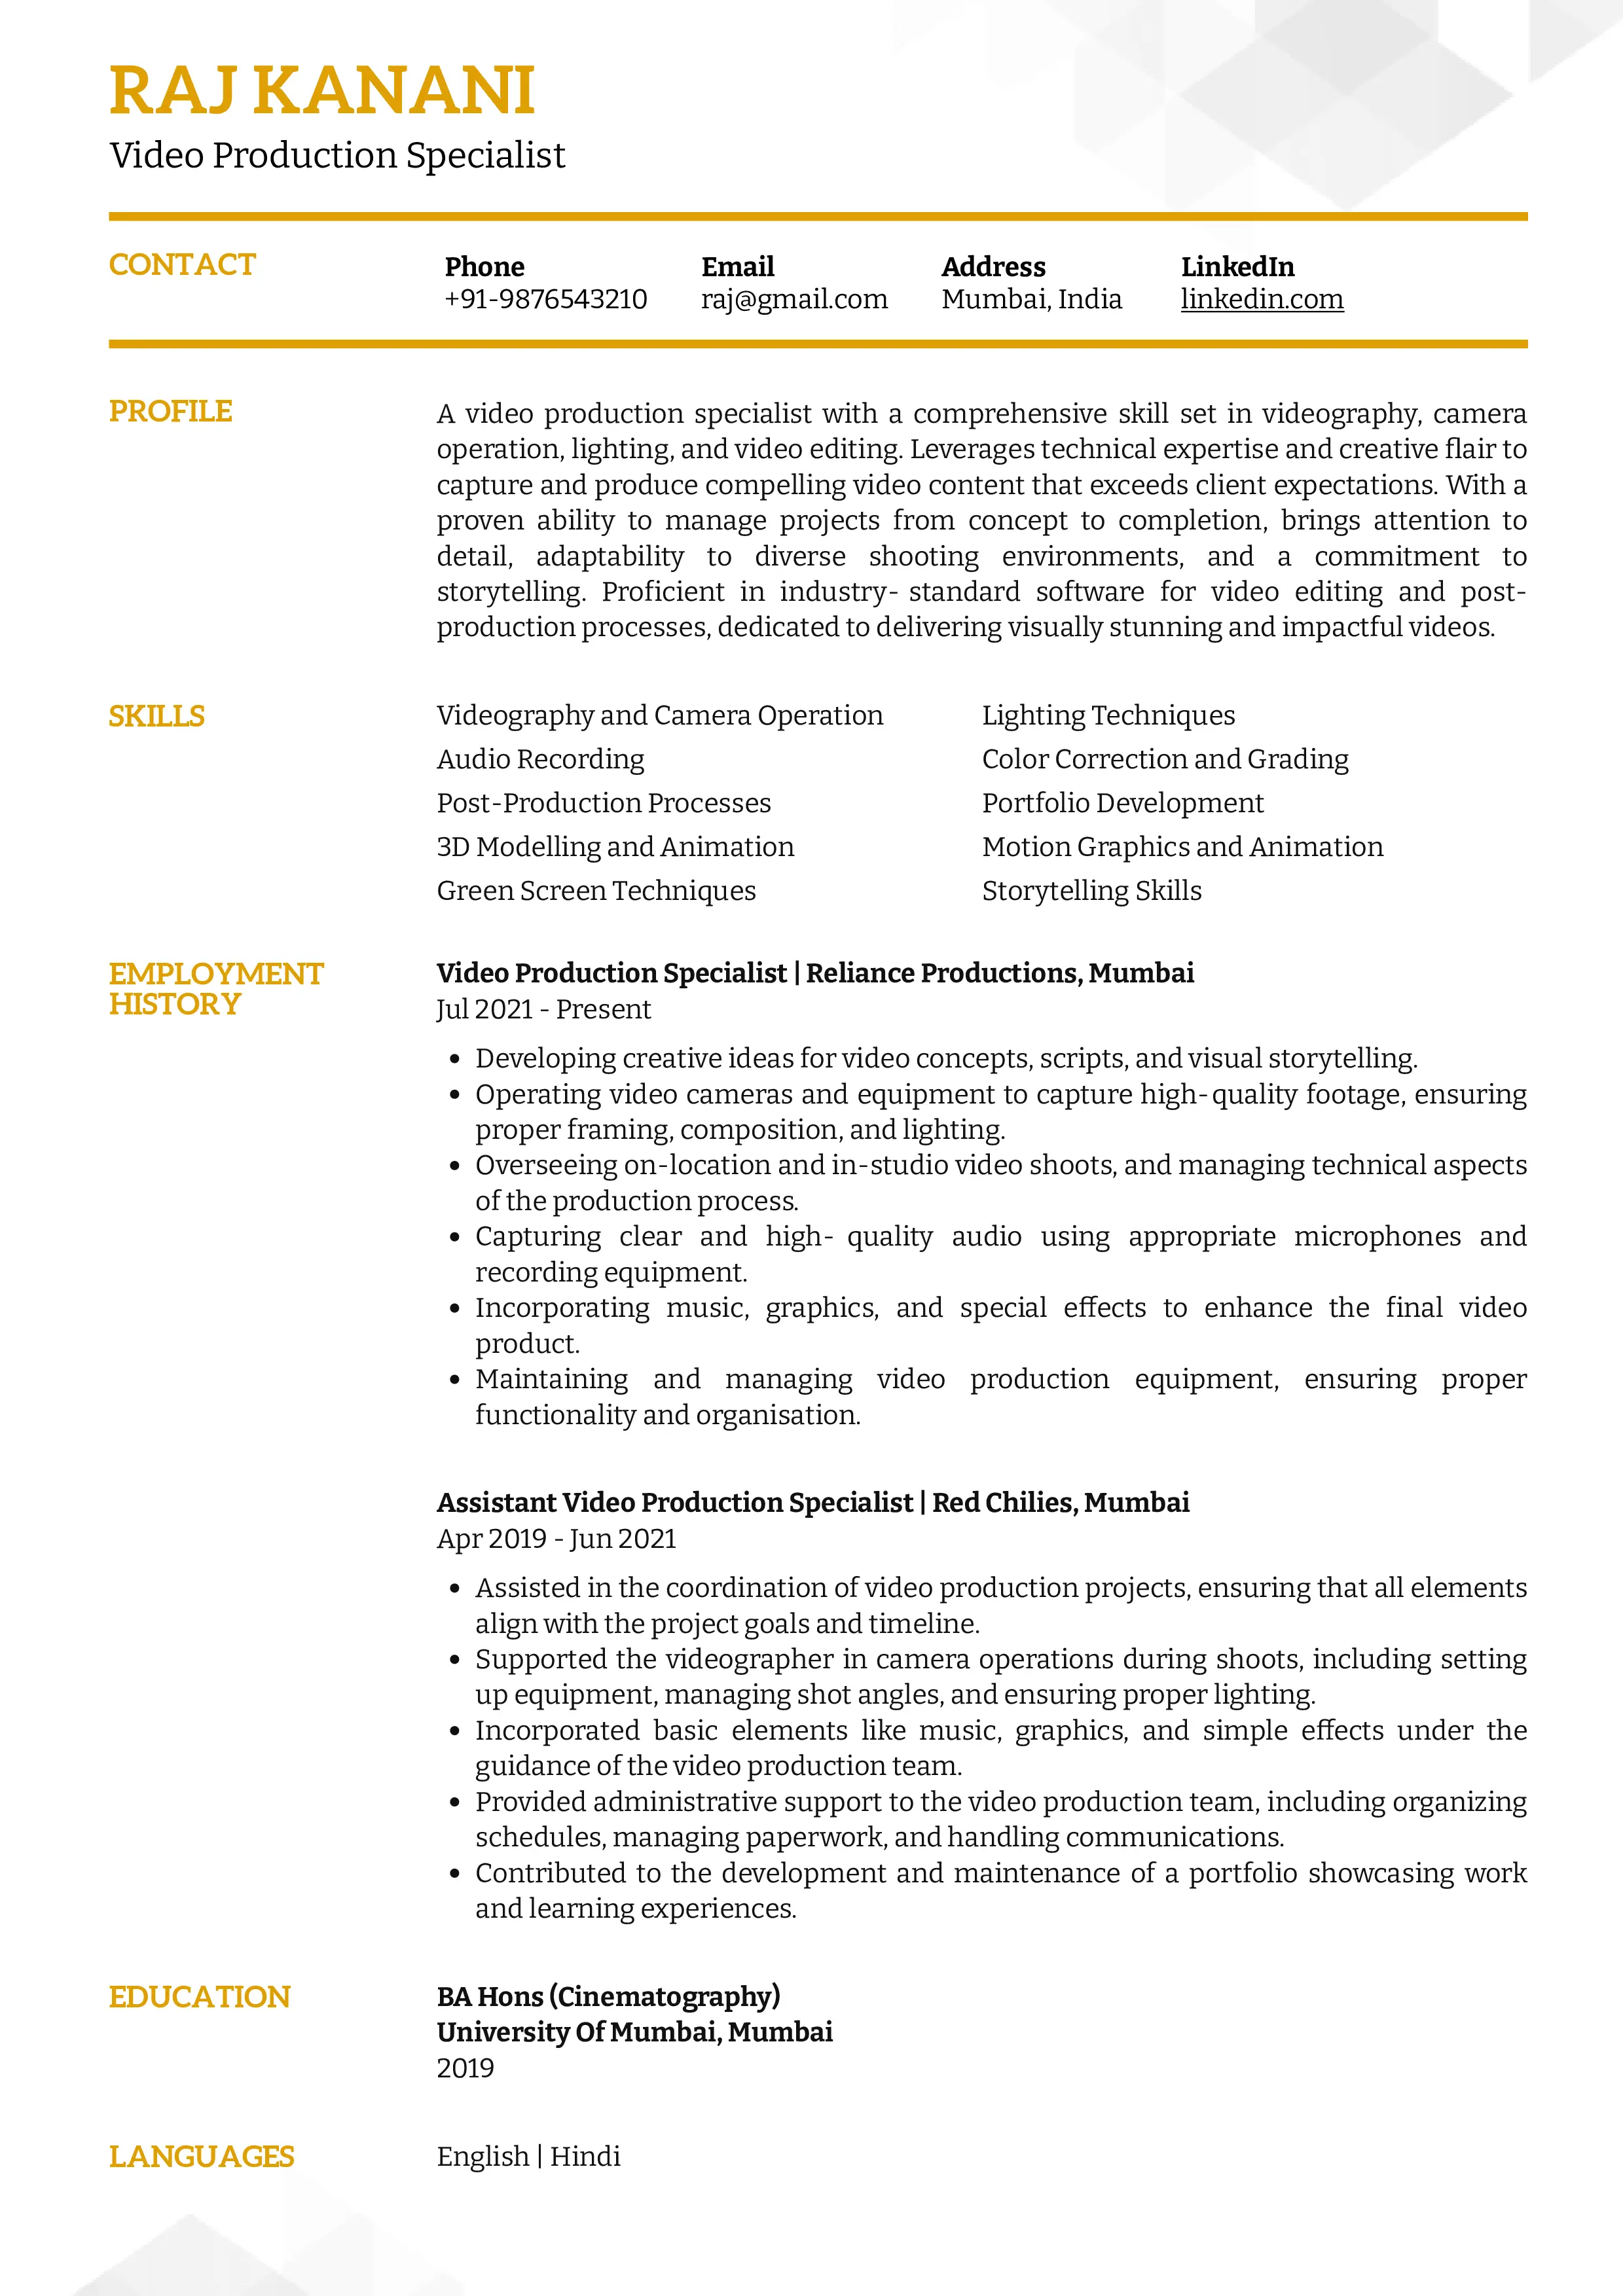 Sample Resume of Video Production Specialist | Free Resume Templates & Samples on Resumod.co